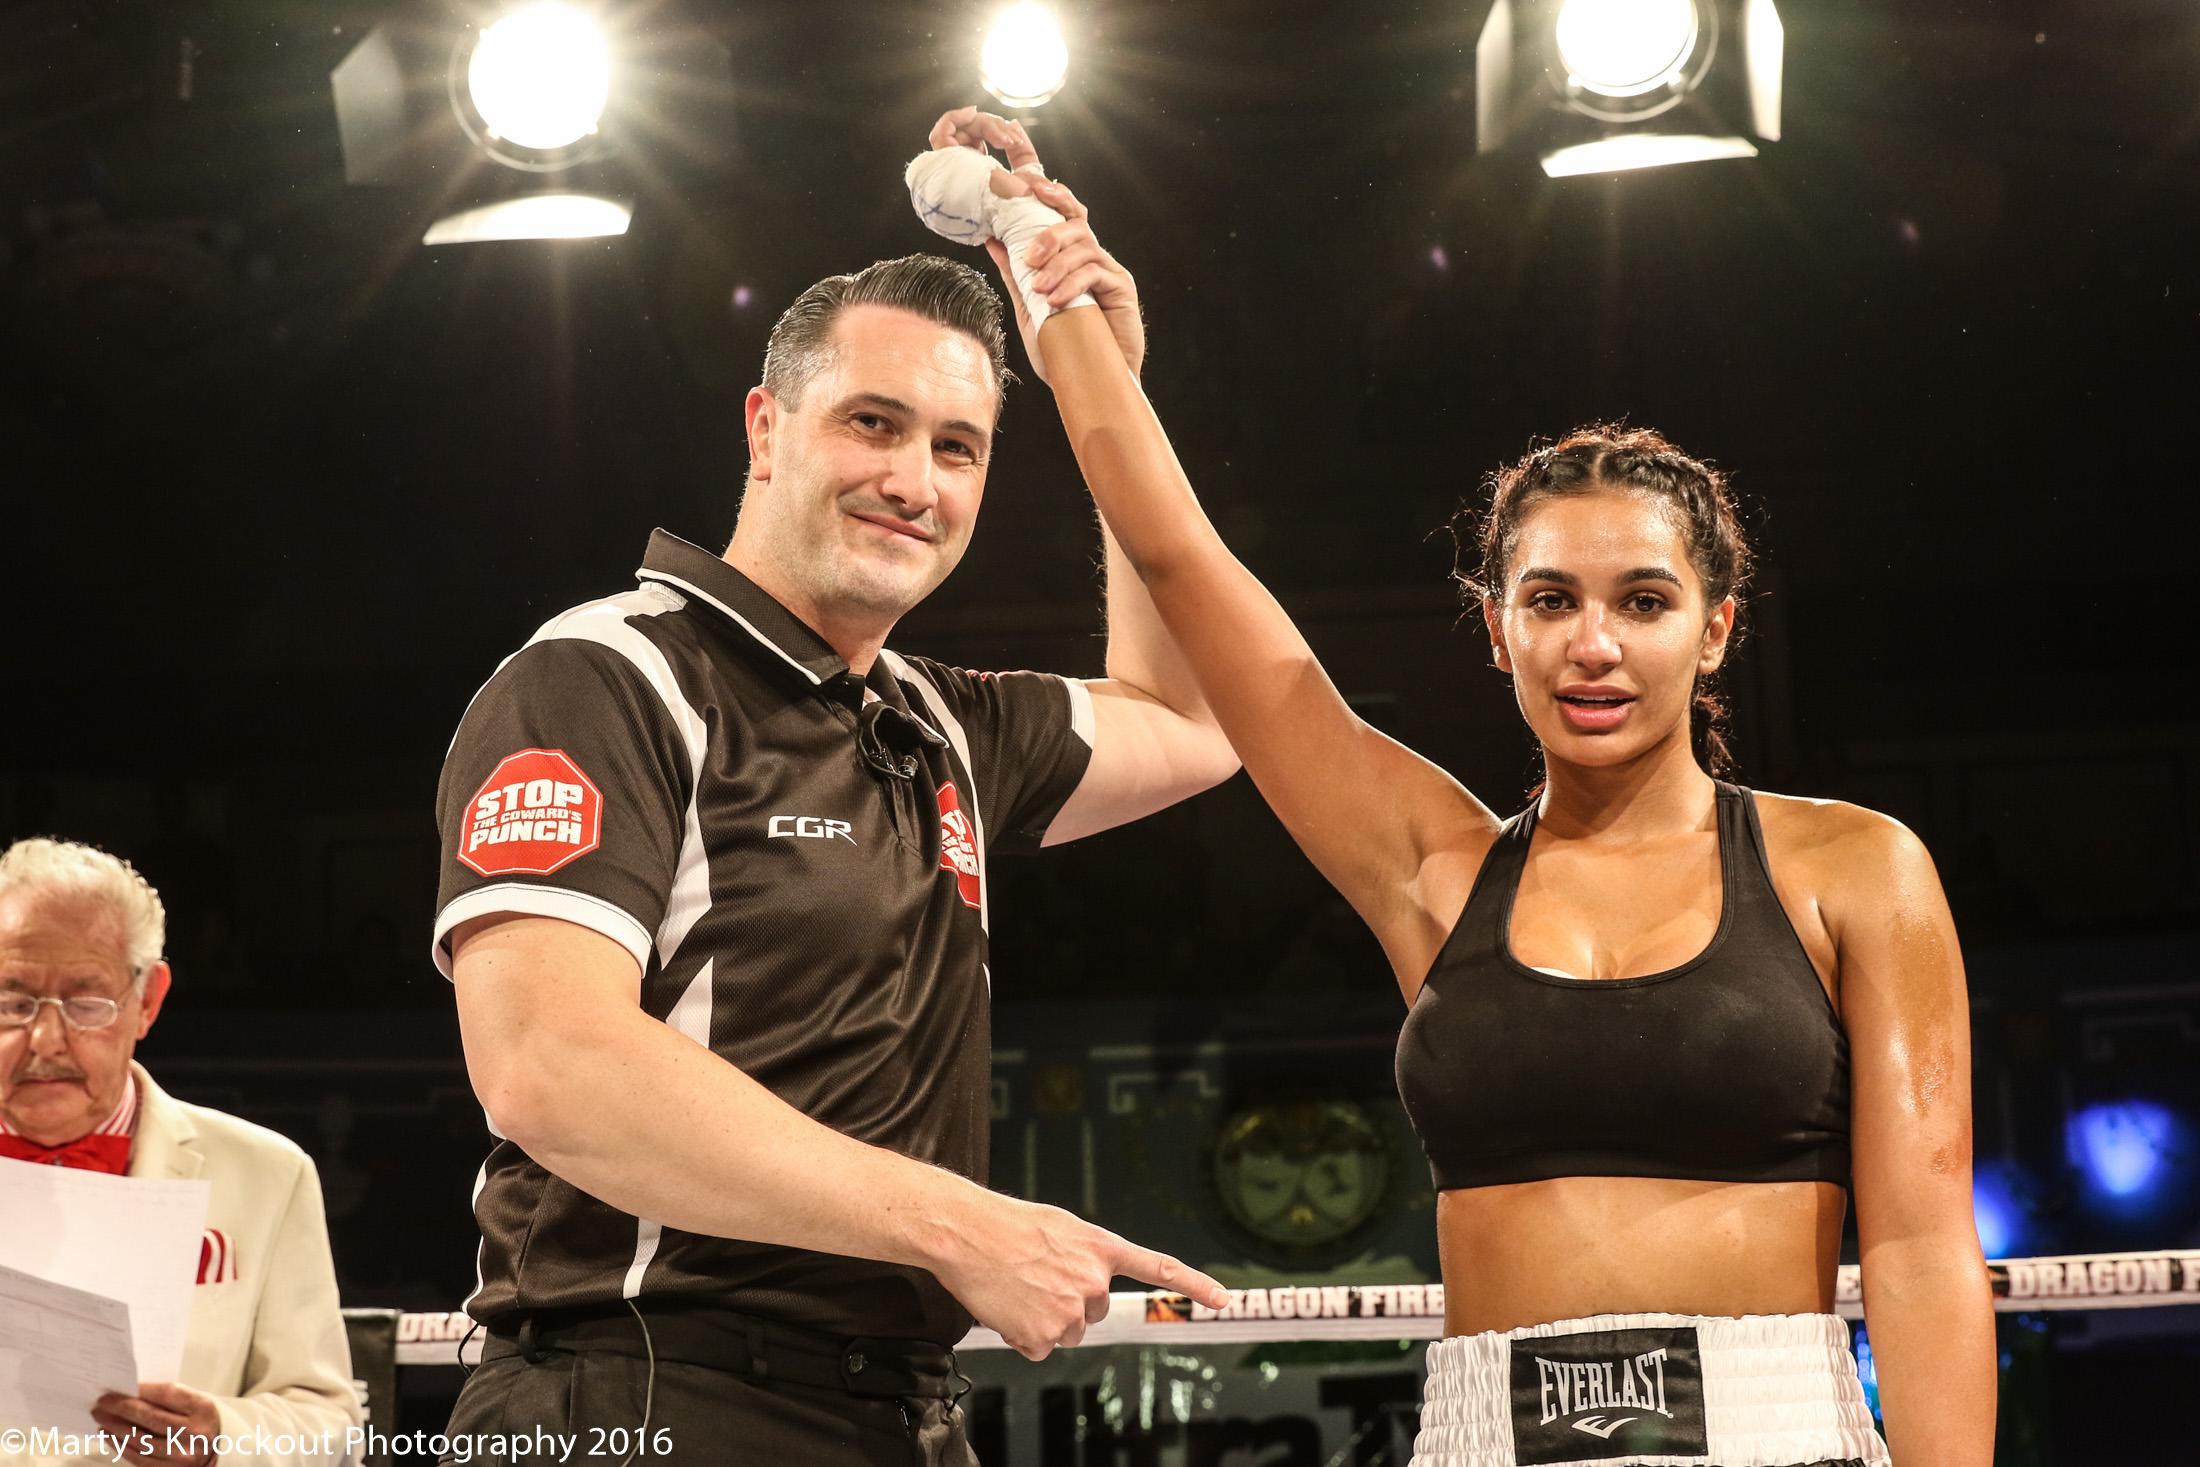 Parnia Porsche wins her 2nd Professional Boxing Match by Unanimous Decision...